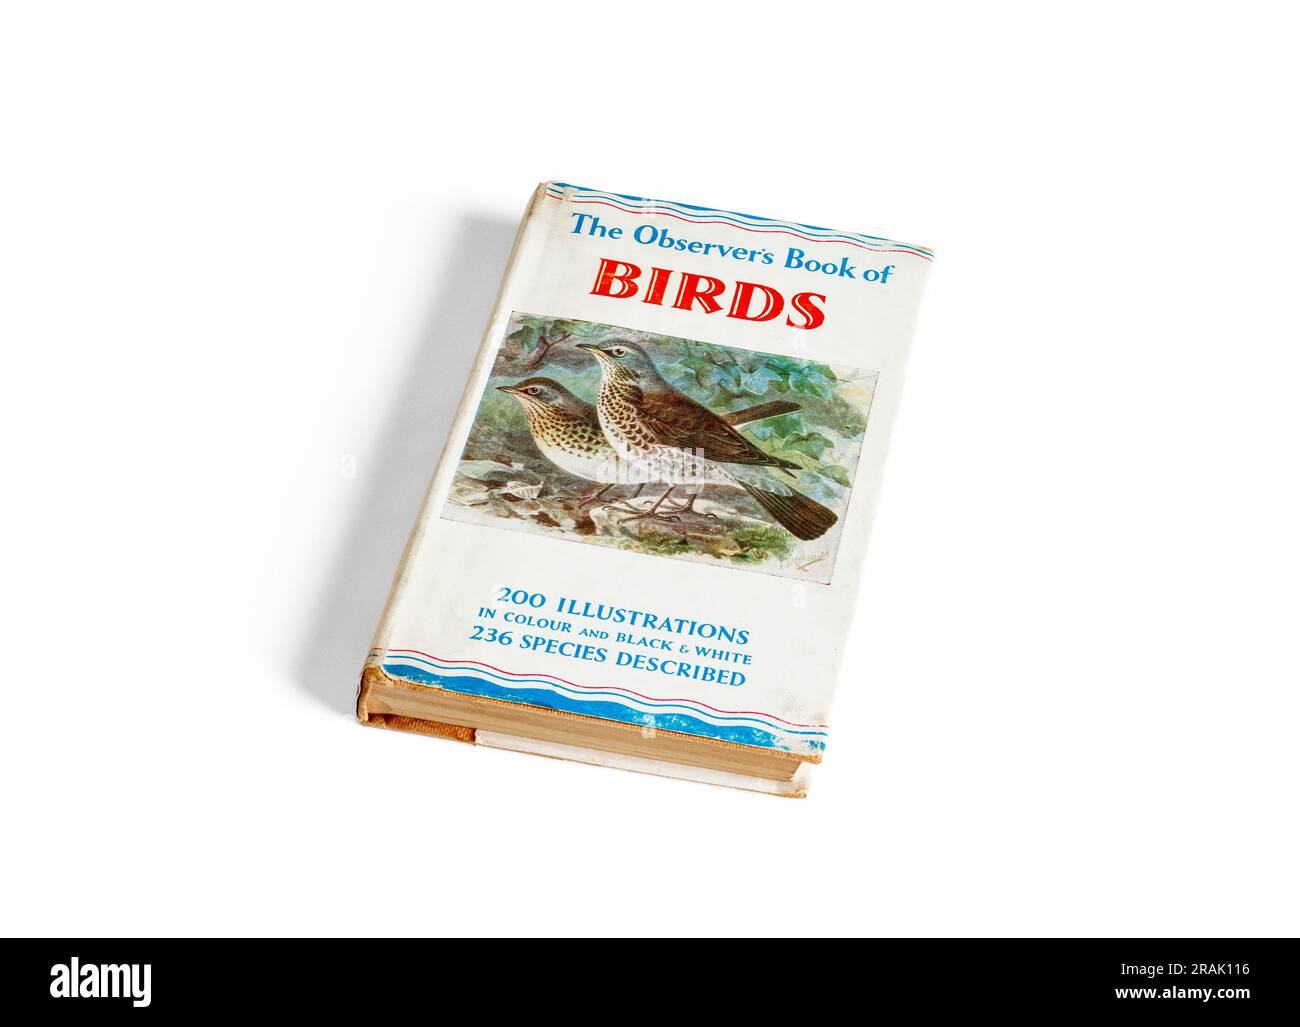 Edizione 1957 di The Observer's Book of Birds, Isolated on a White background, UK Foto Stock